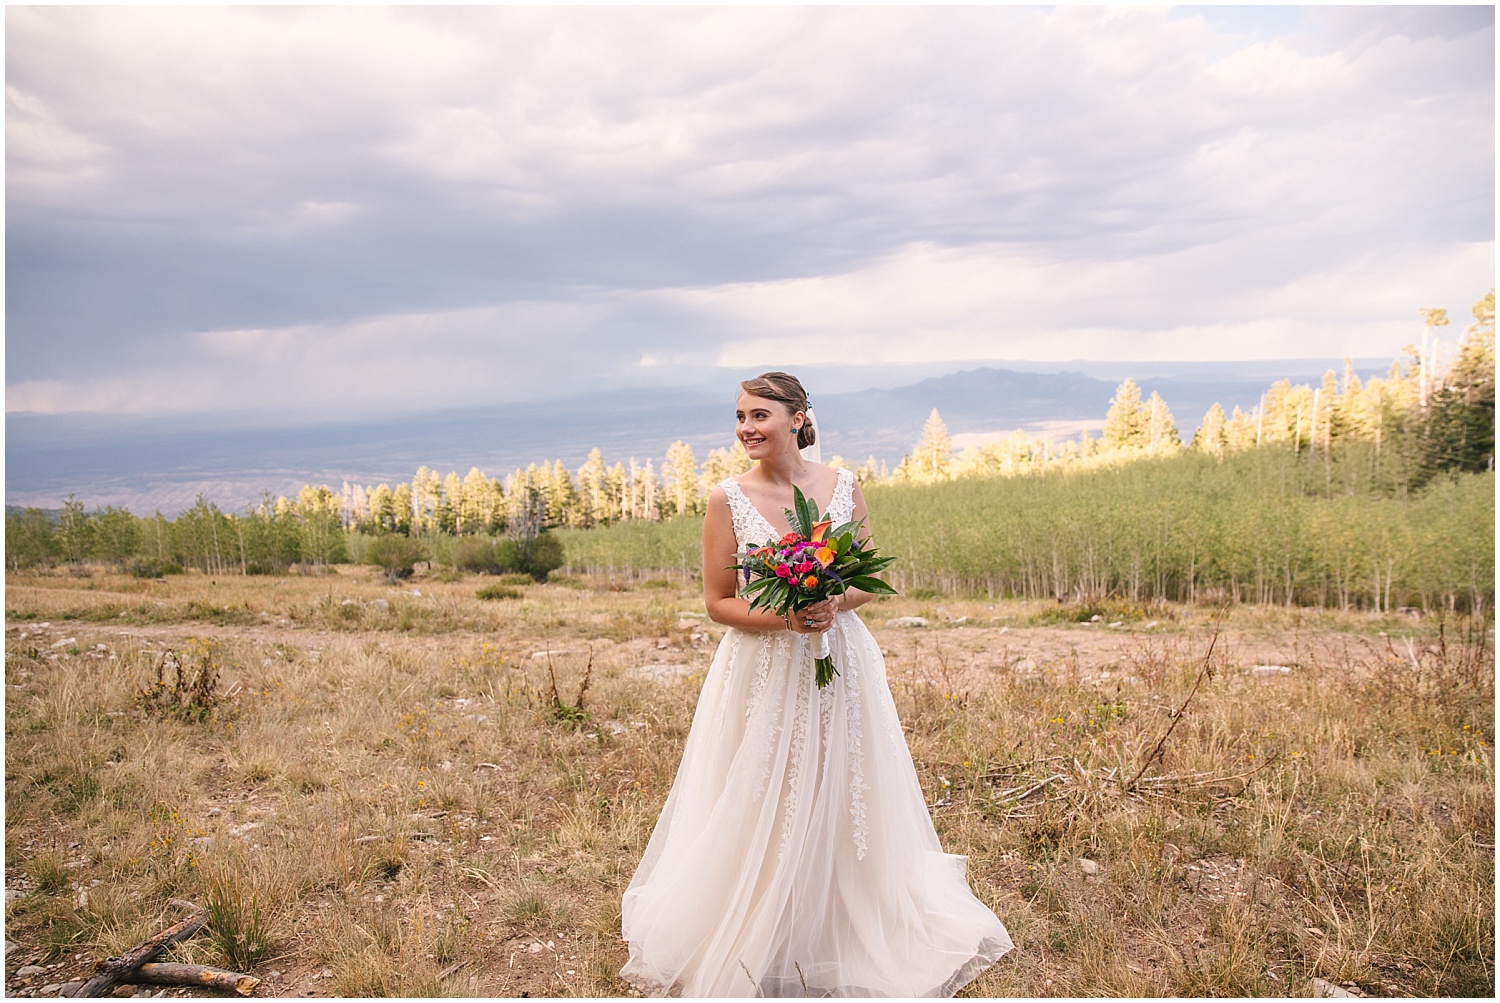 Bridal portrait with sweeping landscape views from the Sandia Mountains outside Albuquerque